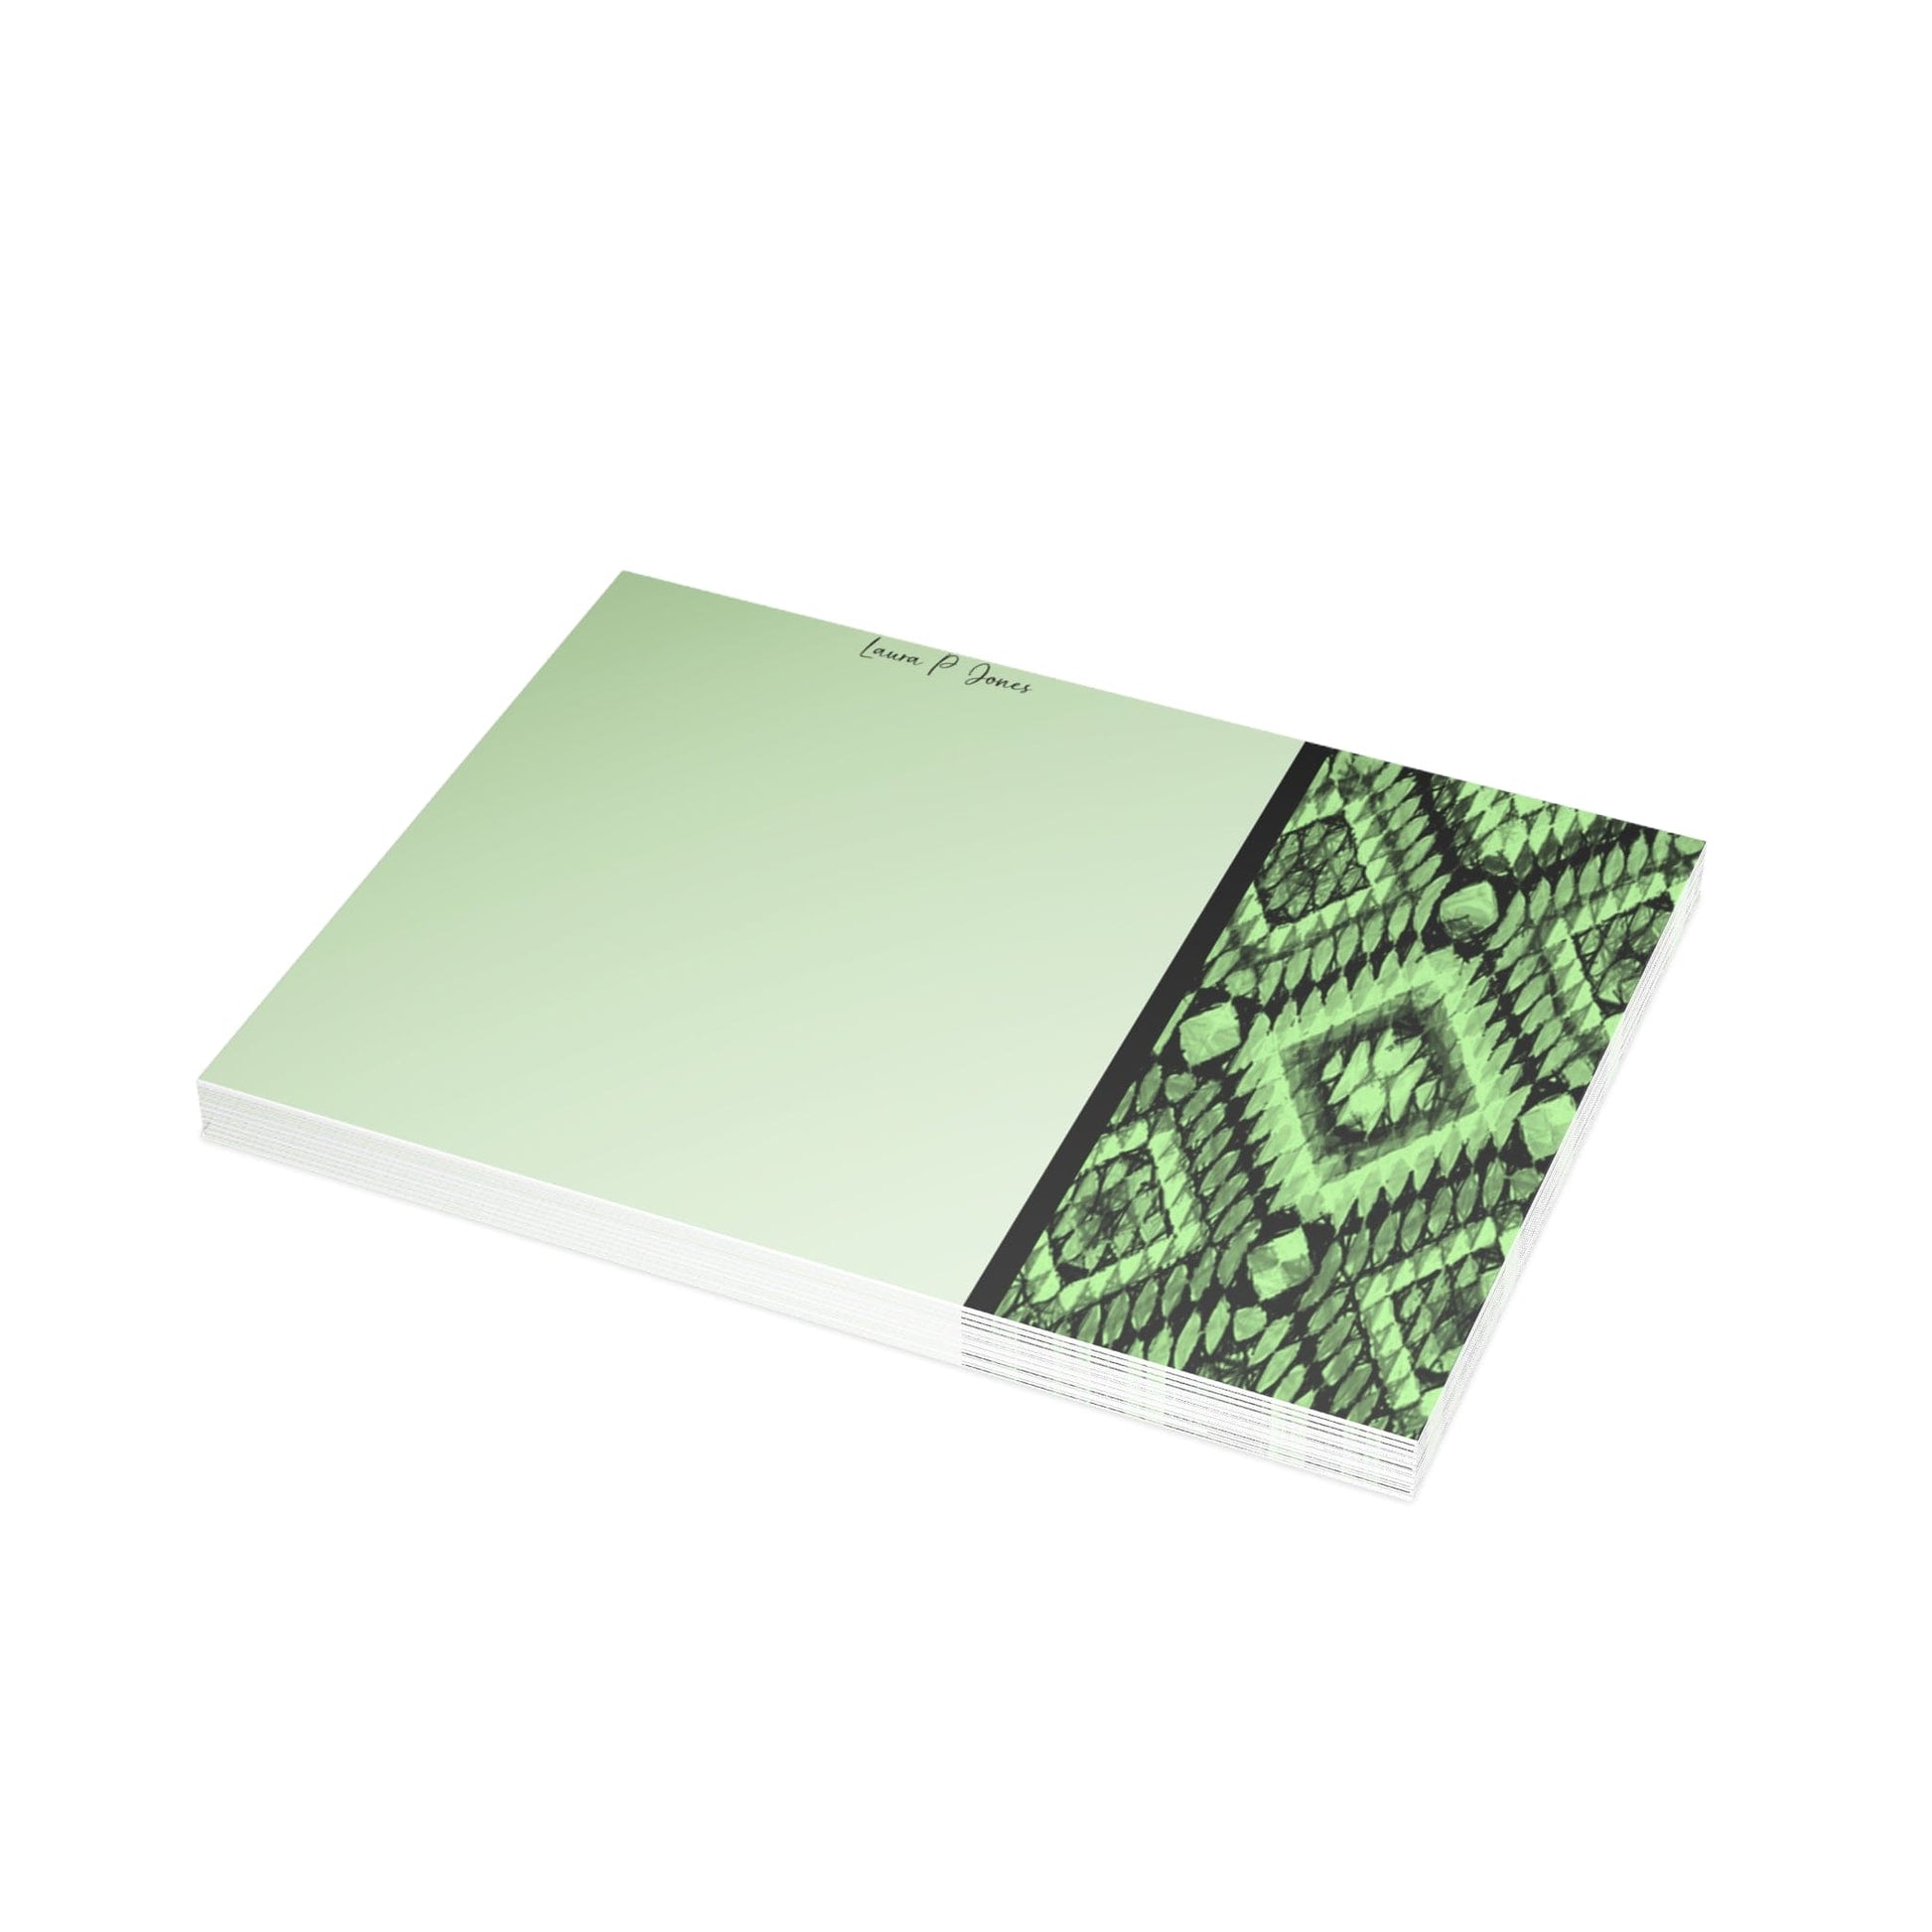 Personalized Note Card: Add a Personal Touch with Customized Stationery for Every Occasion. HER Notecard